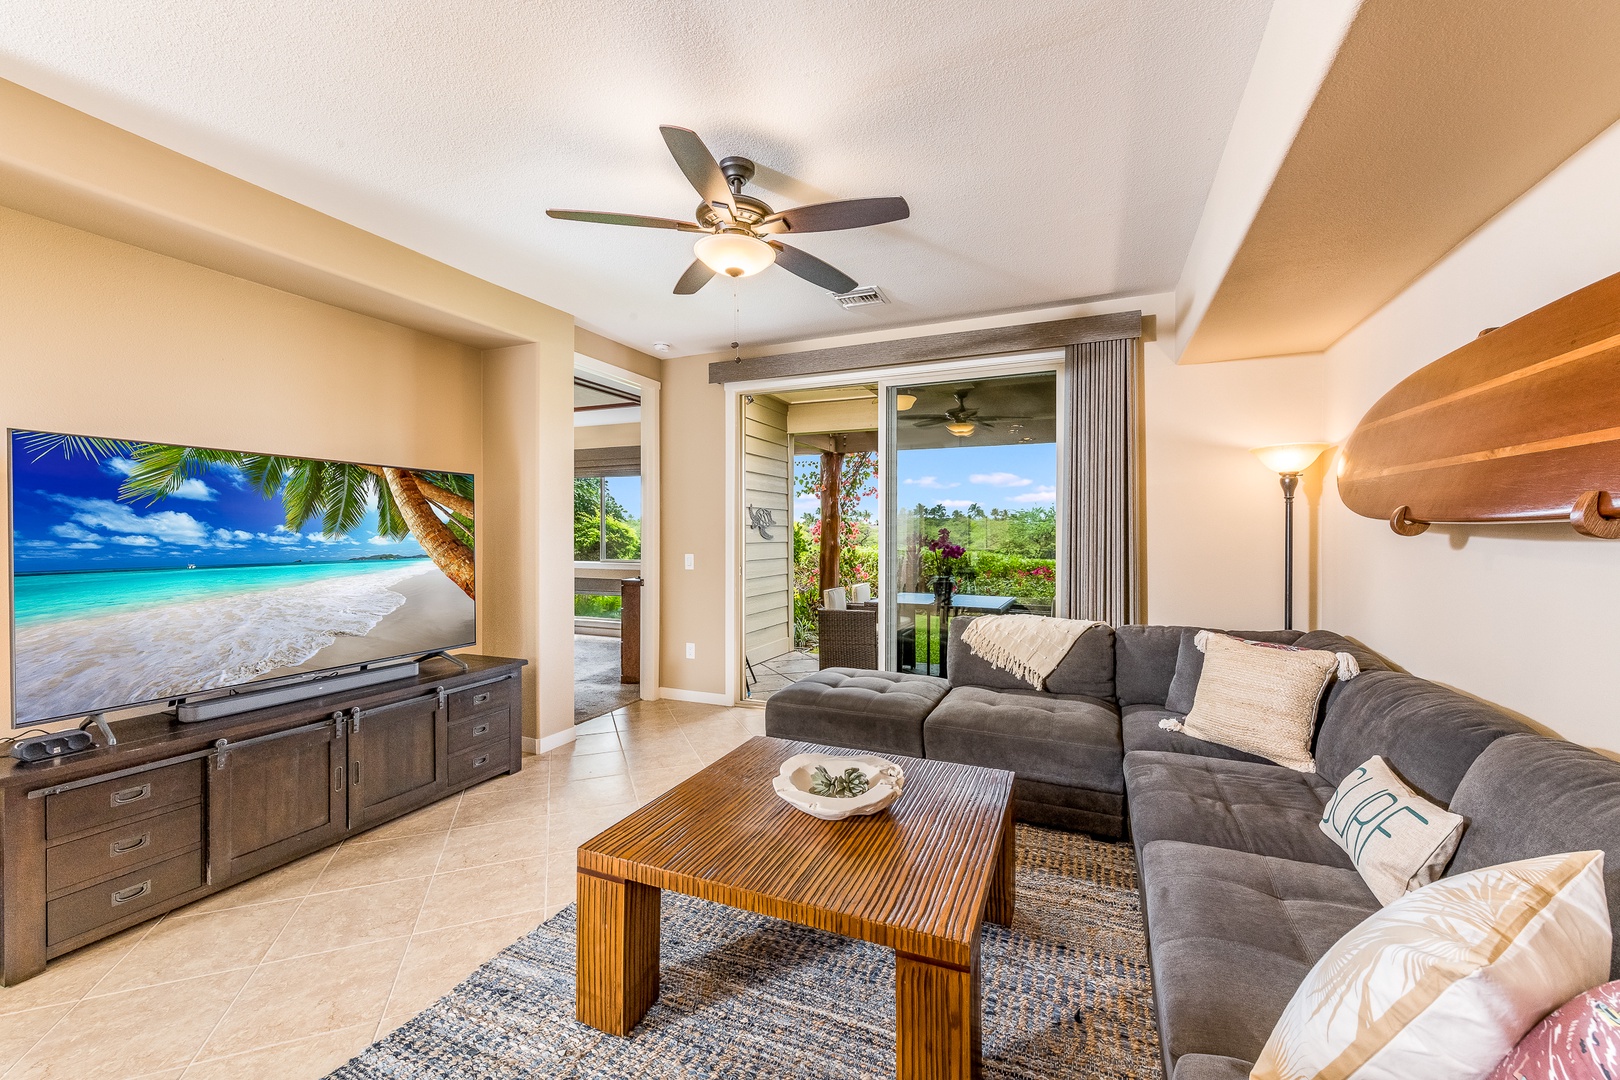 Kamuela Vacation Rentals, Palm Villas E1 - This stunning 2 bedroom, 2 bathroom ground floor condo is perfectly situated to offer breathtaking views of the Pacific Ocean and the stunning sunset over the historical park.